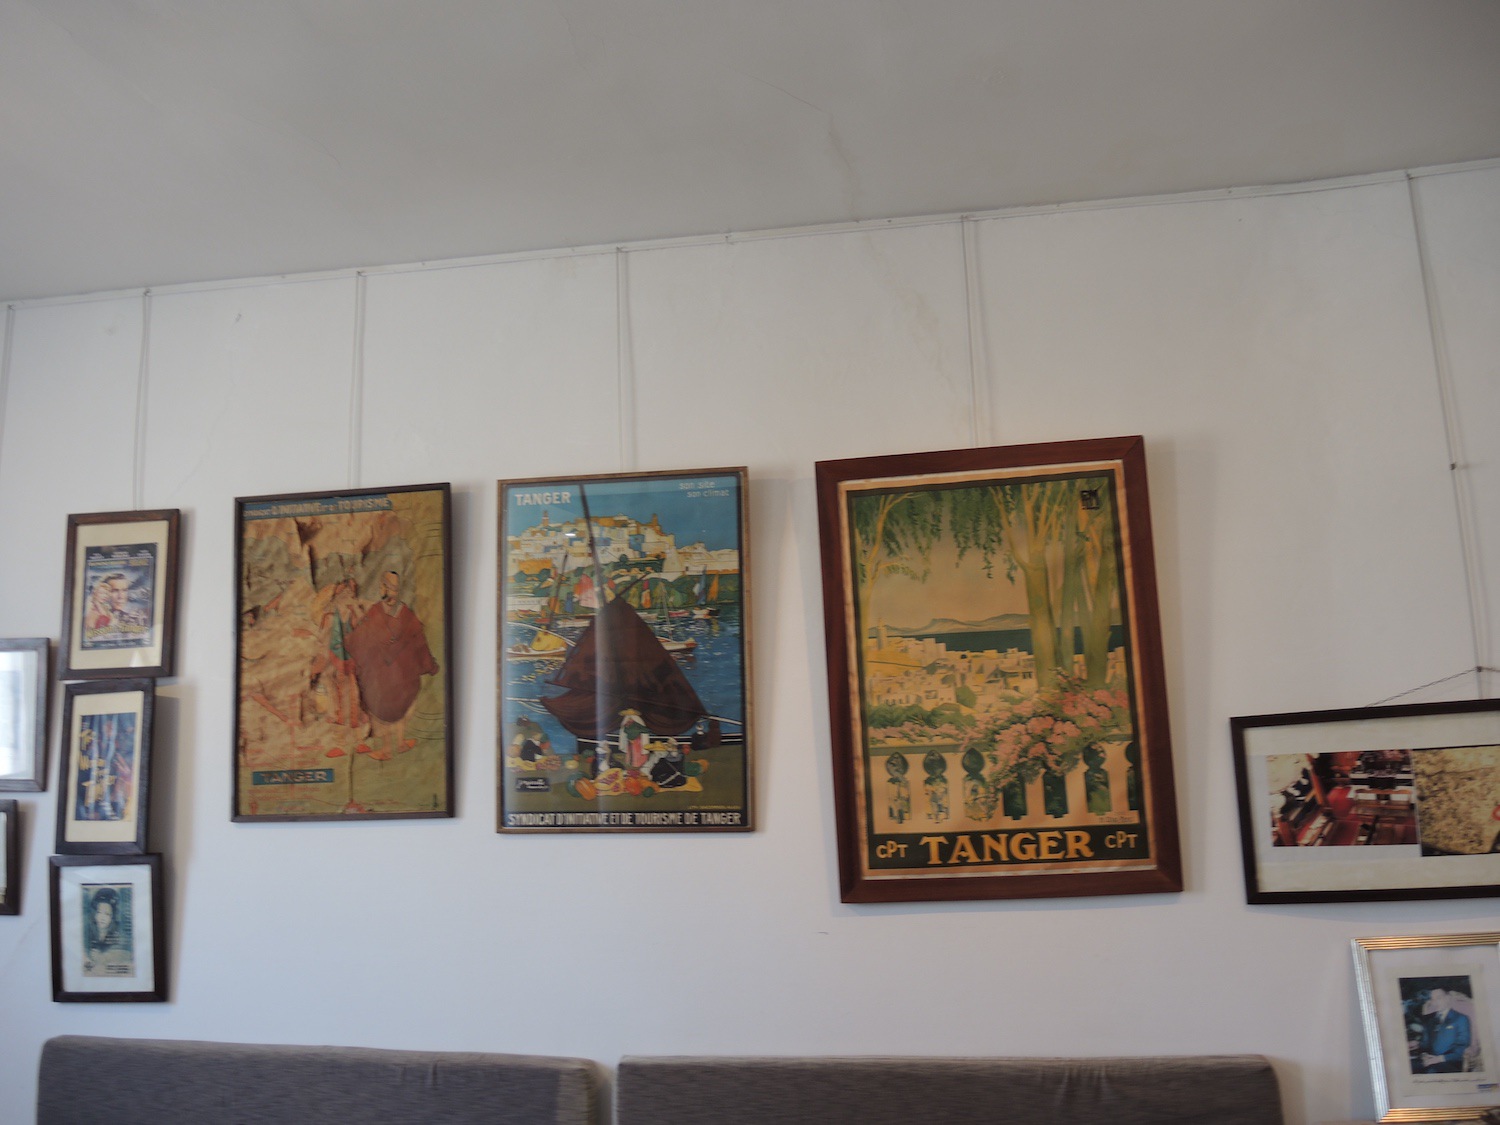 Musée-Fondation Lorin - View of a wall displaying old travel posters